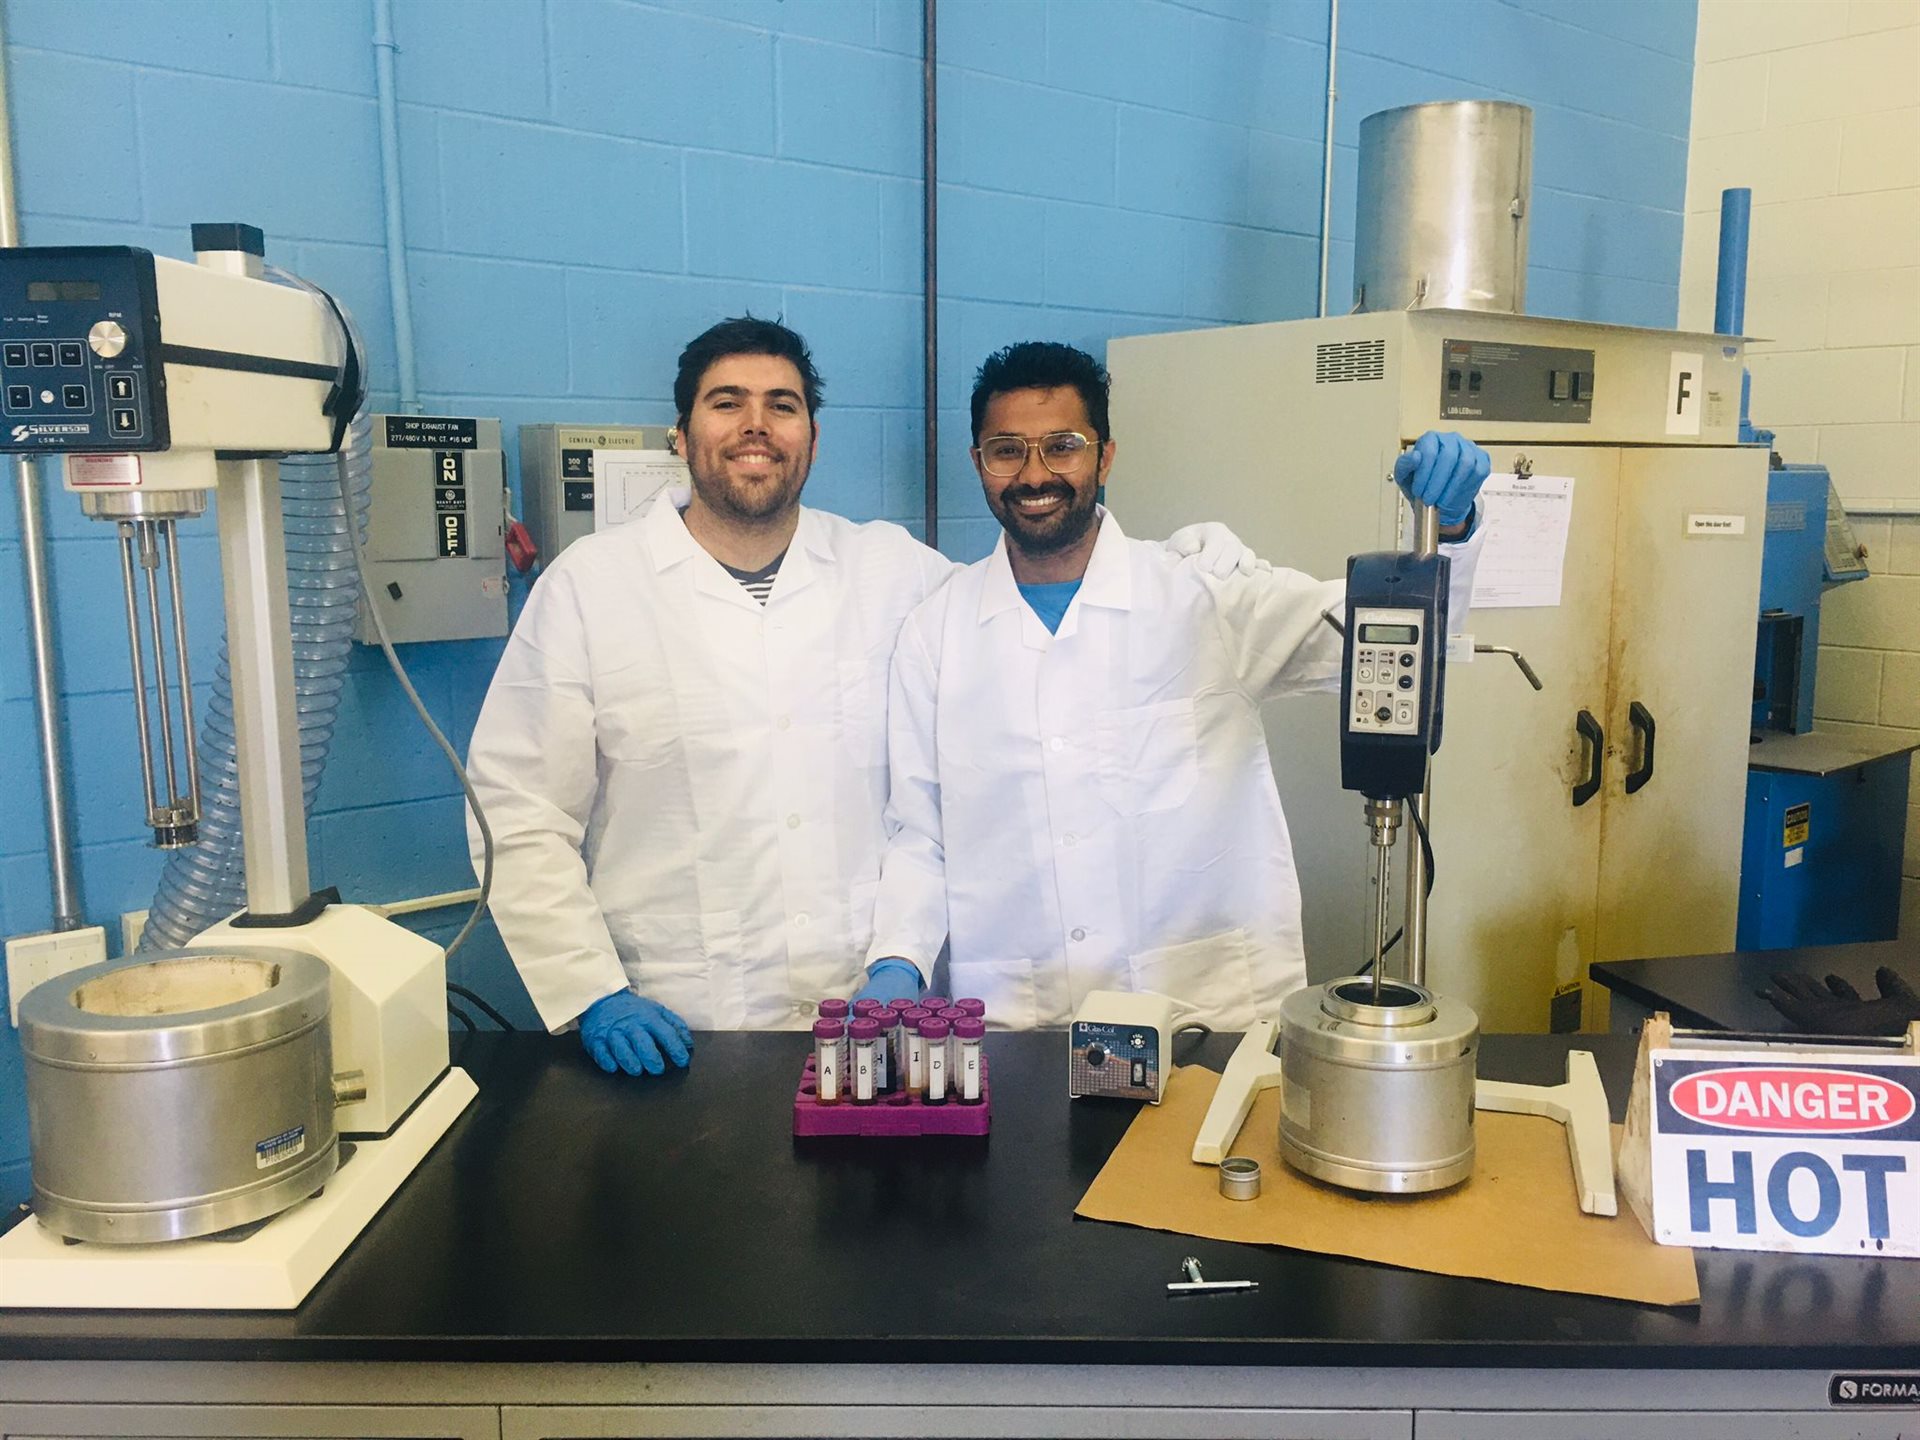 University of Illinois Urbana-Champaign graduate students, from left, Javier Garc&iacute;a Mainieri and Punit Singhvi pose with the asphalt binder modifiers and equipment used for the project at the Advanced Transportation Research and Engineering Laboratory in Rantoul, Ill.